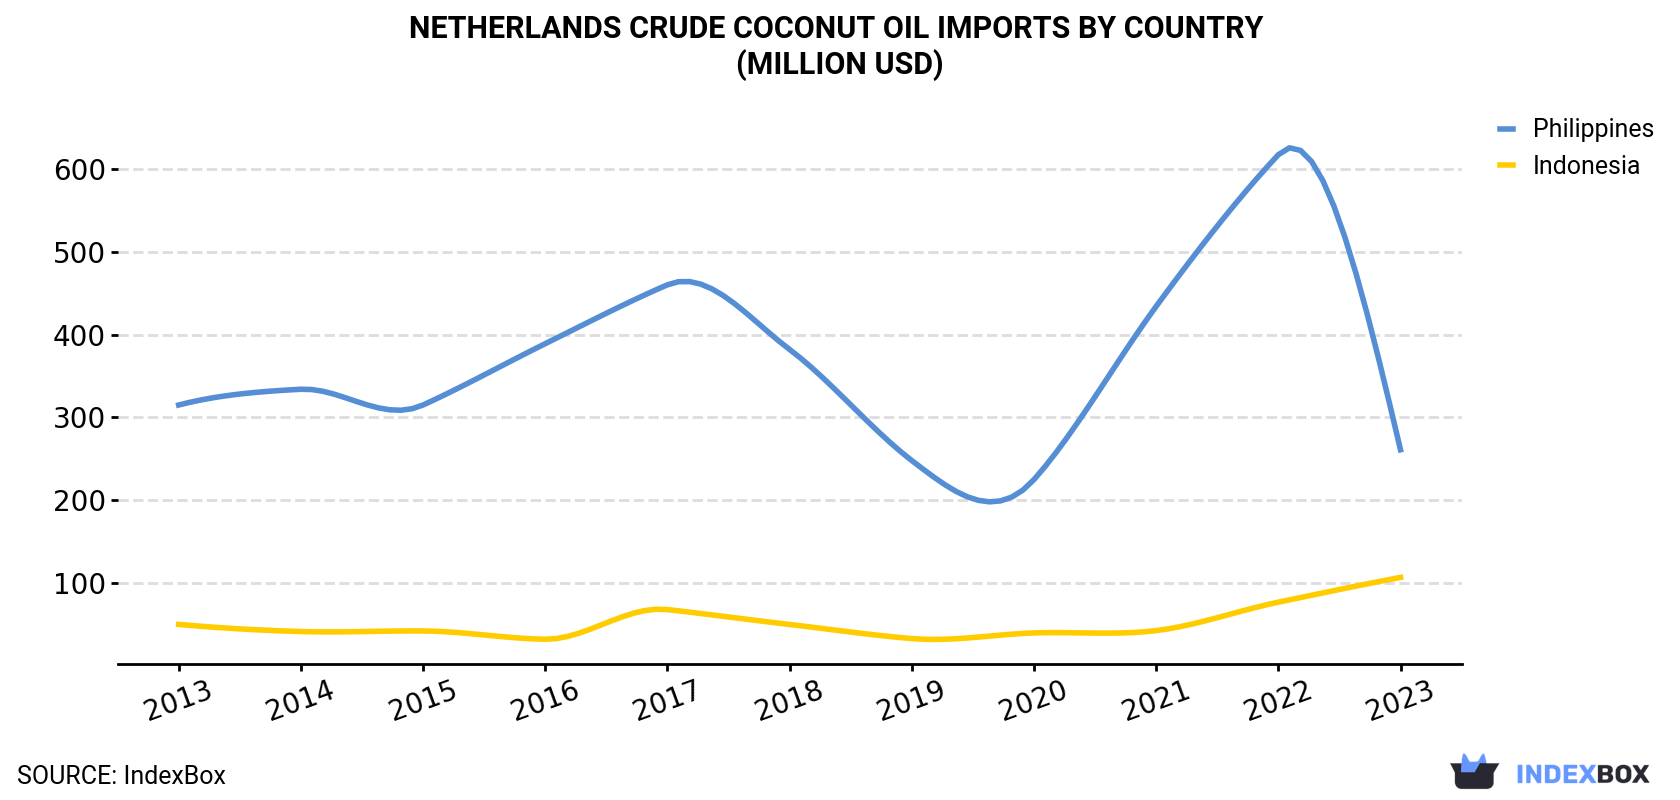 Netherlands Crude Coconut Oil Imports By Country (Million USD)